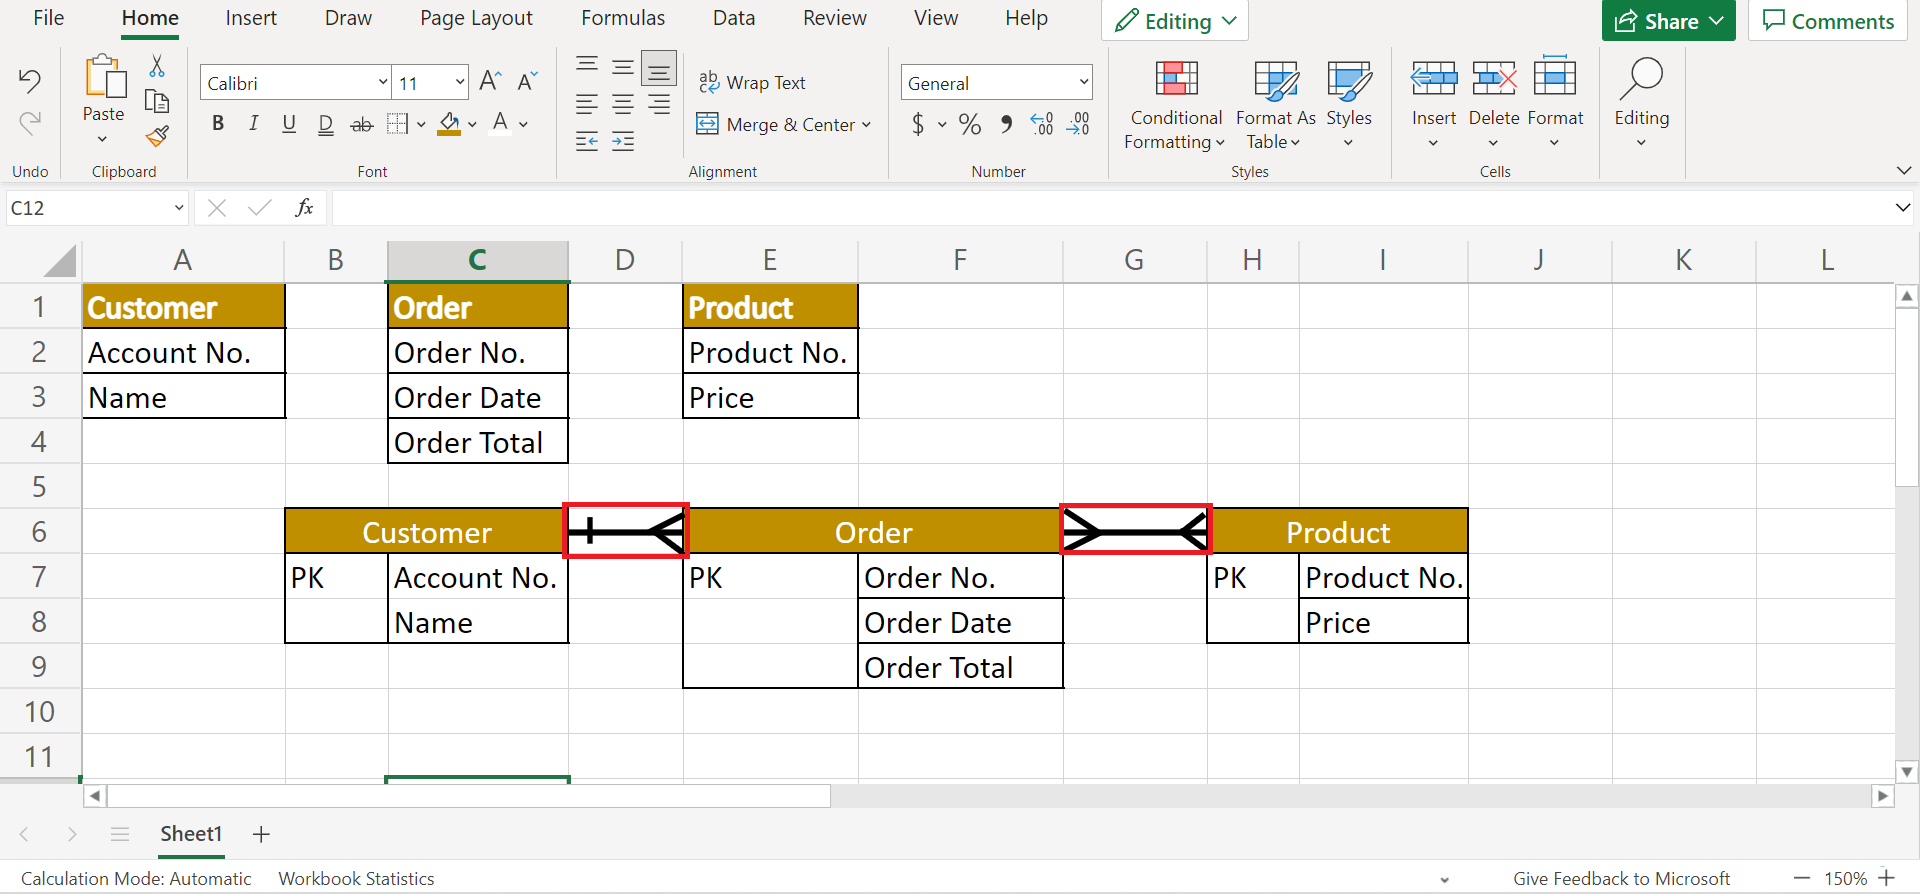 Create Entity Relationship Diagram in Excel